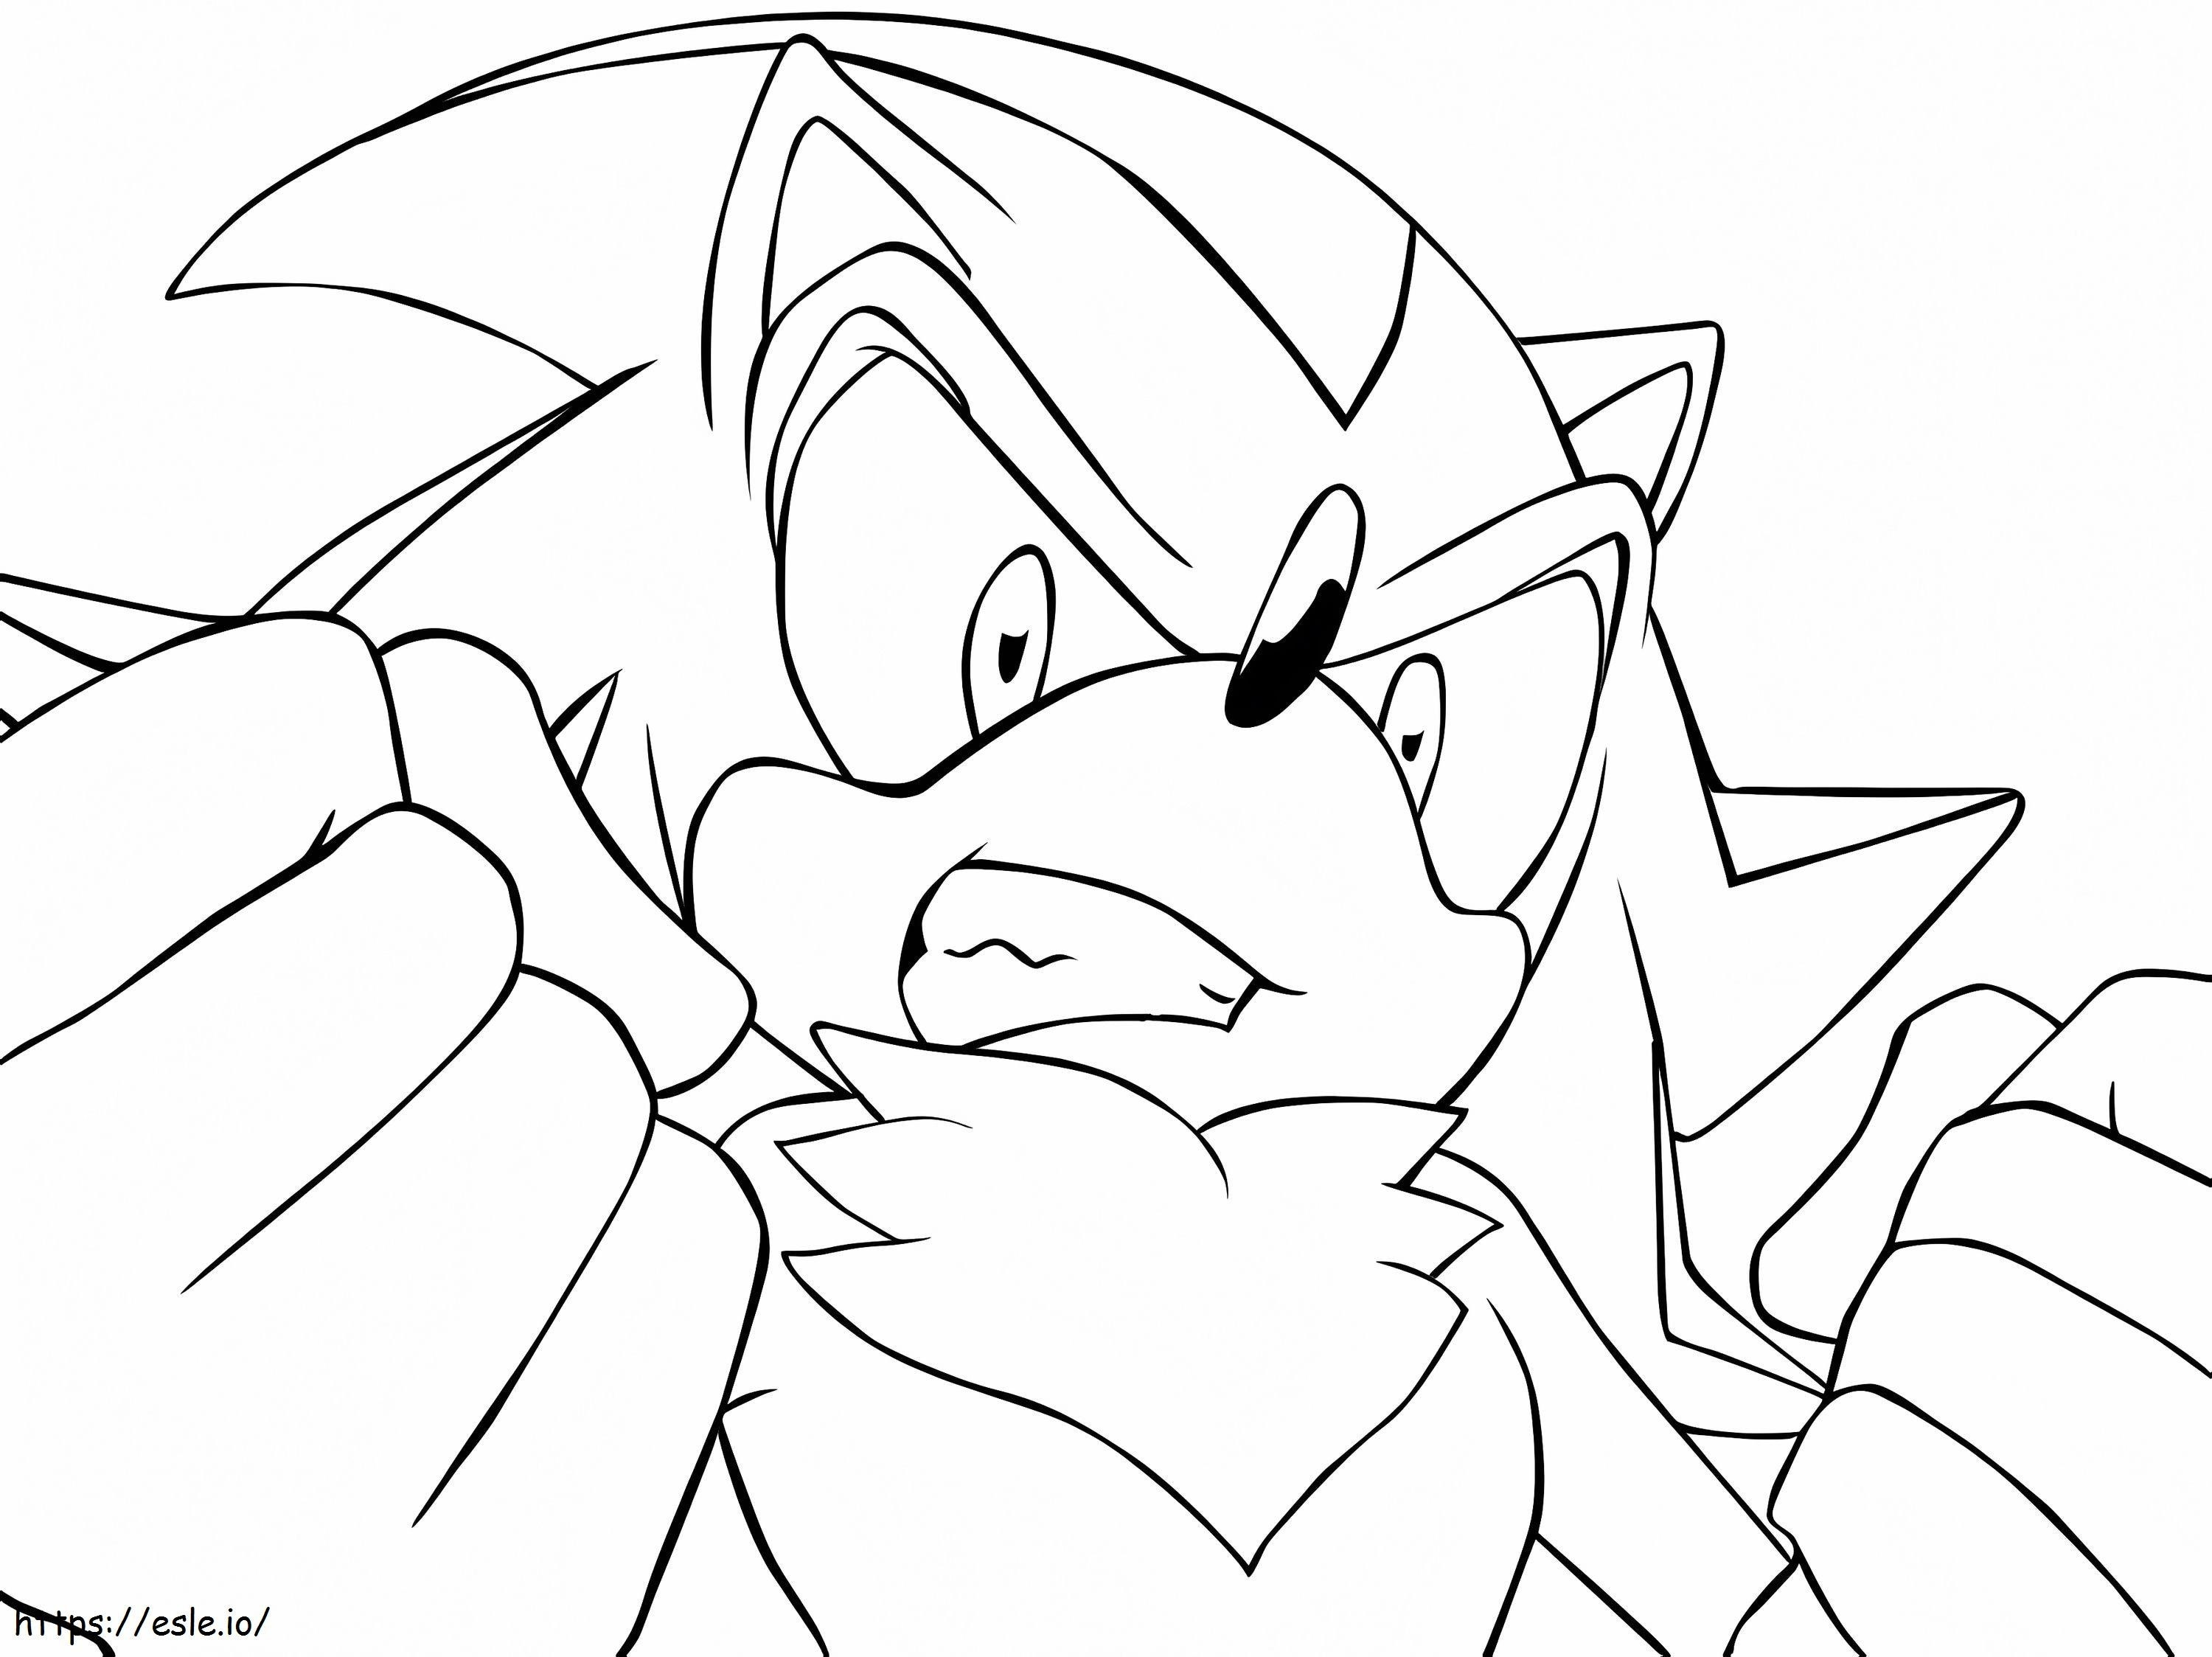 Shadow The Hedgehog Gets Angry coloring page